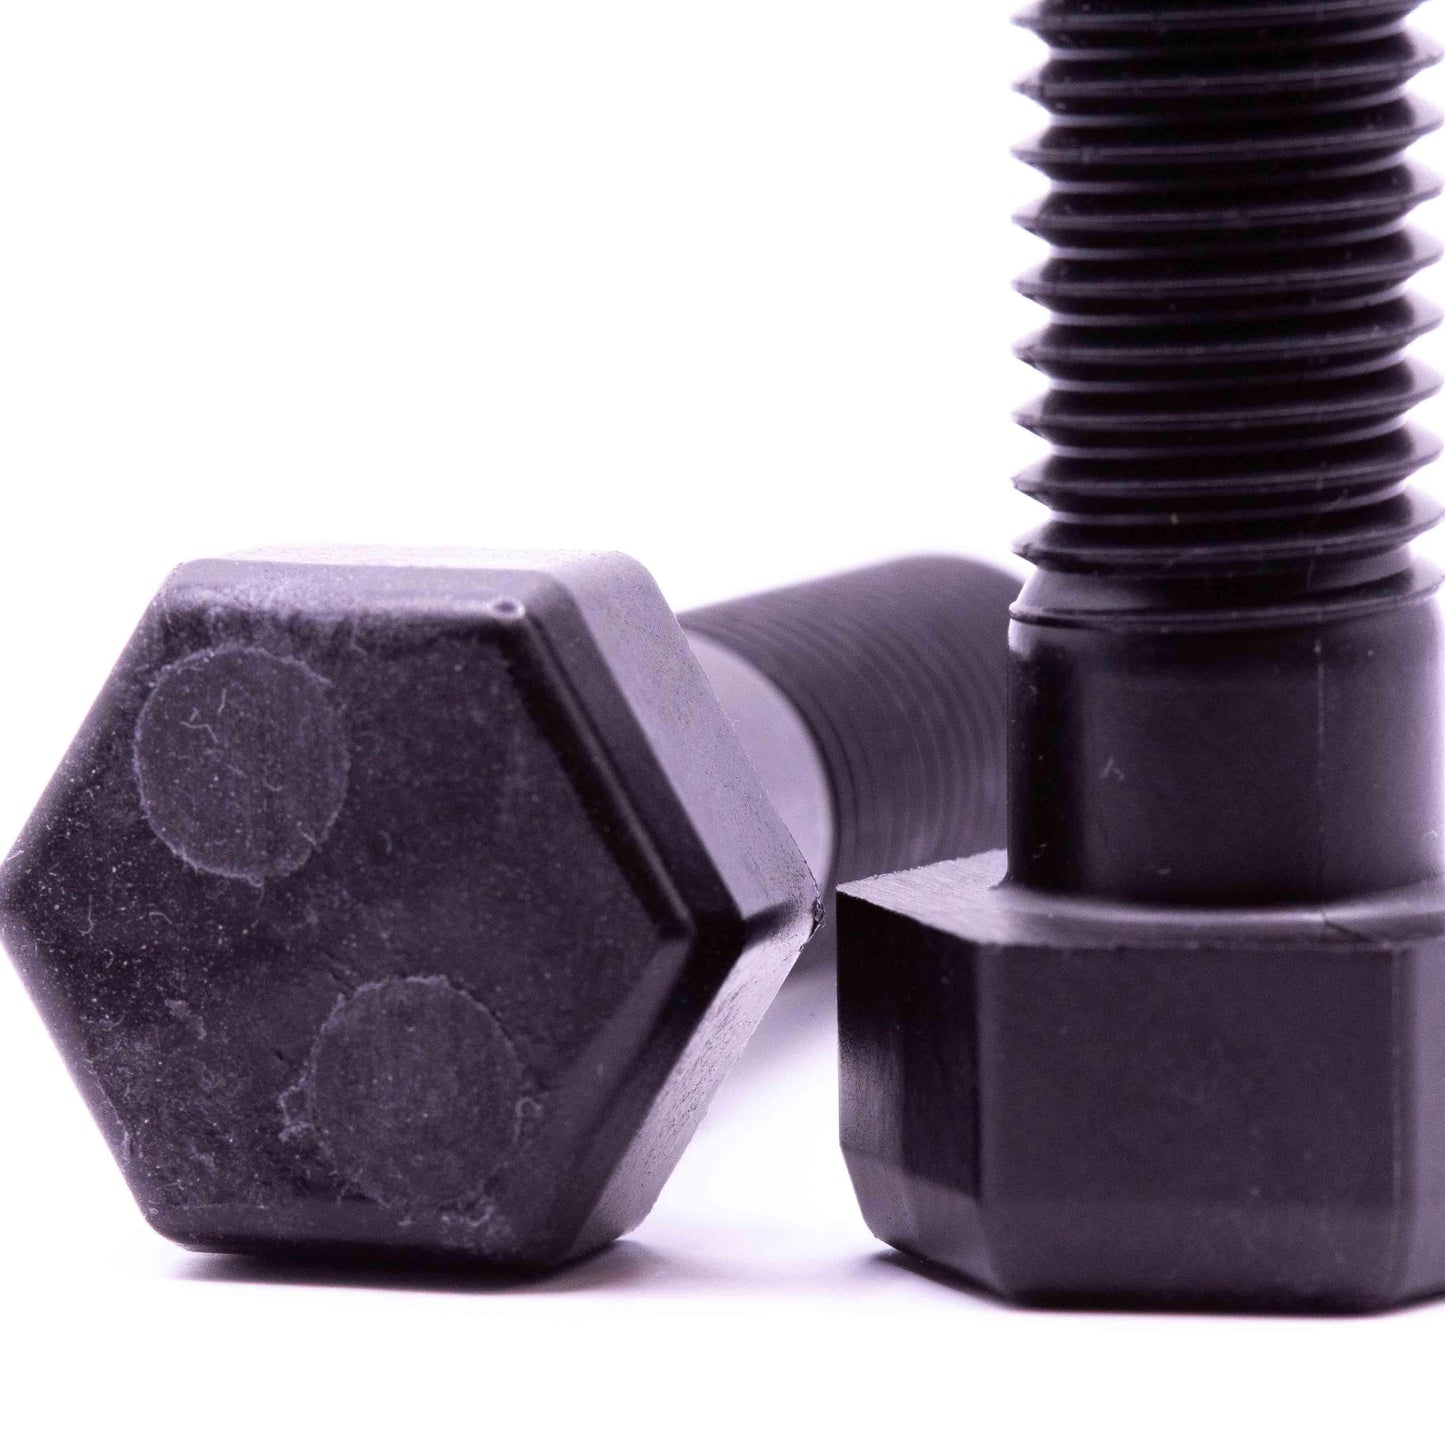 KYOUJIN Hexagon Bolts - High Performance Polymer-Plastic Fastener Components